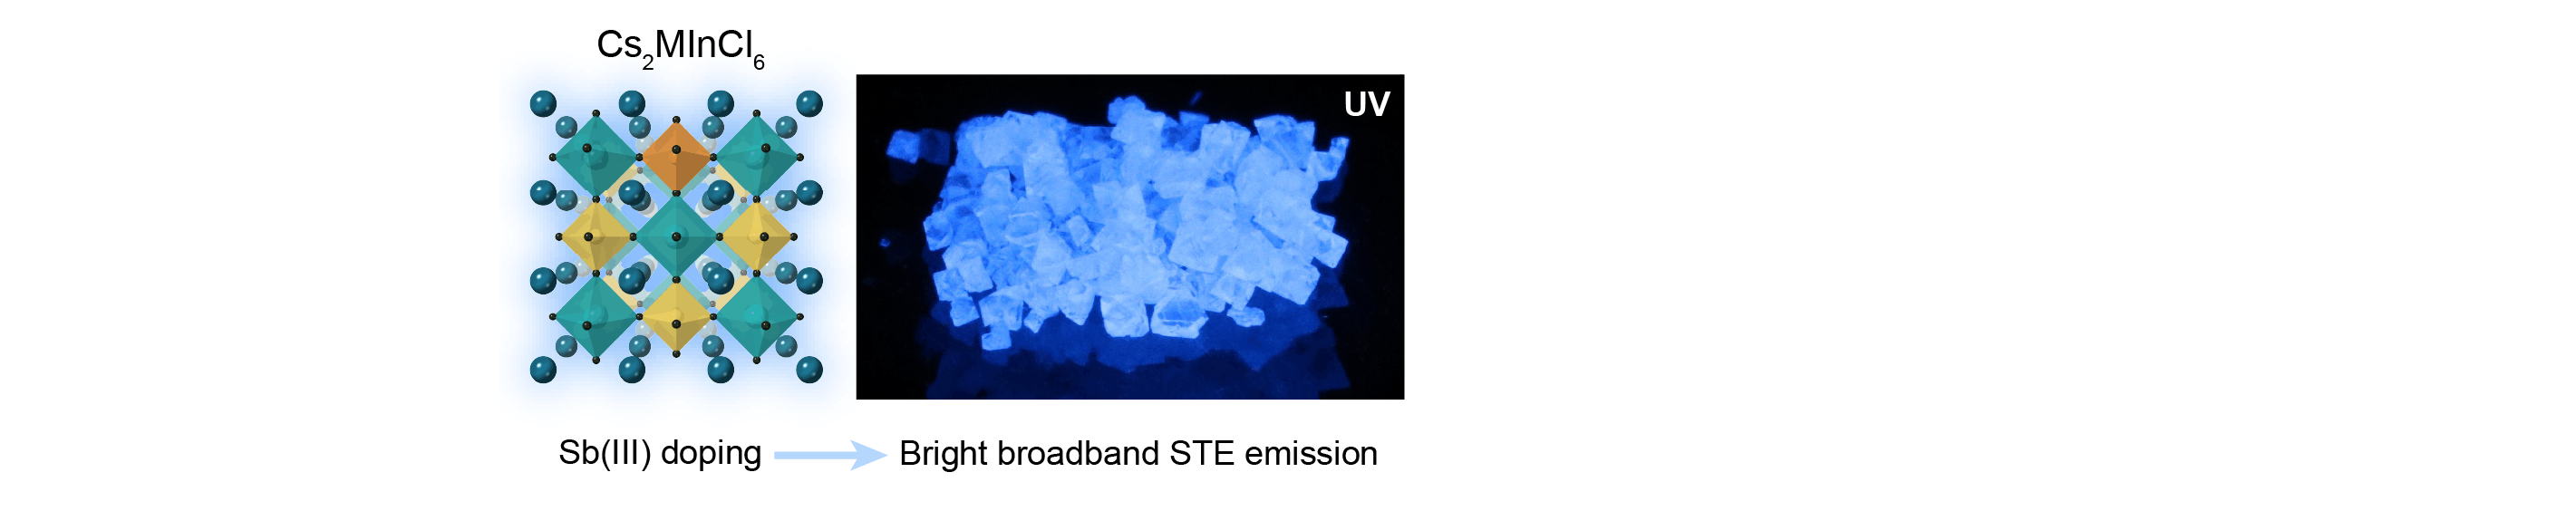 Bright Blue and Green Luminescence of Sb(III) in Double Perovskite Cs2MInCl6 (M = Na, K) Matrices